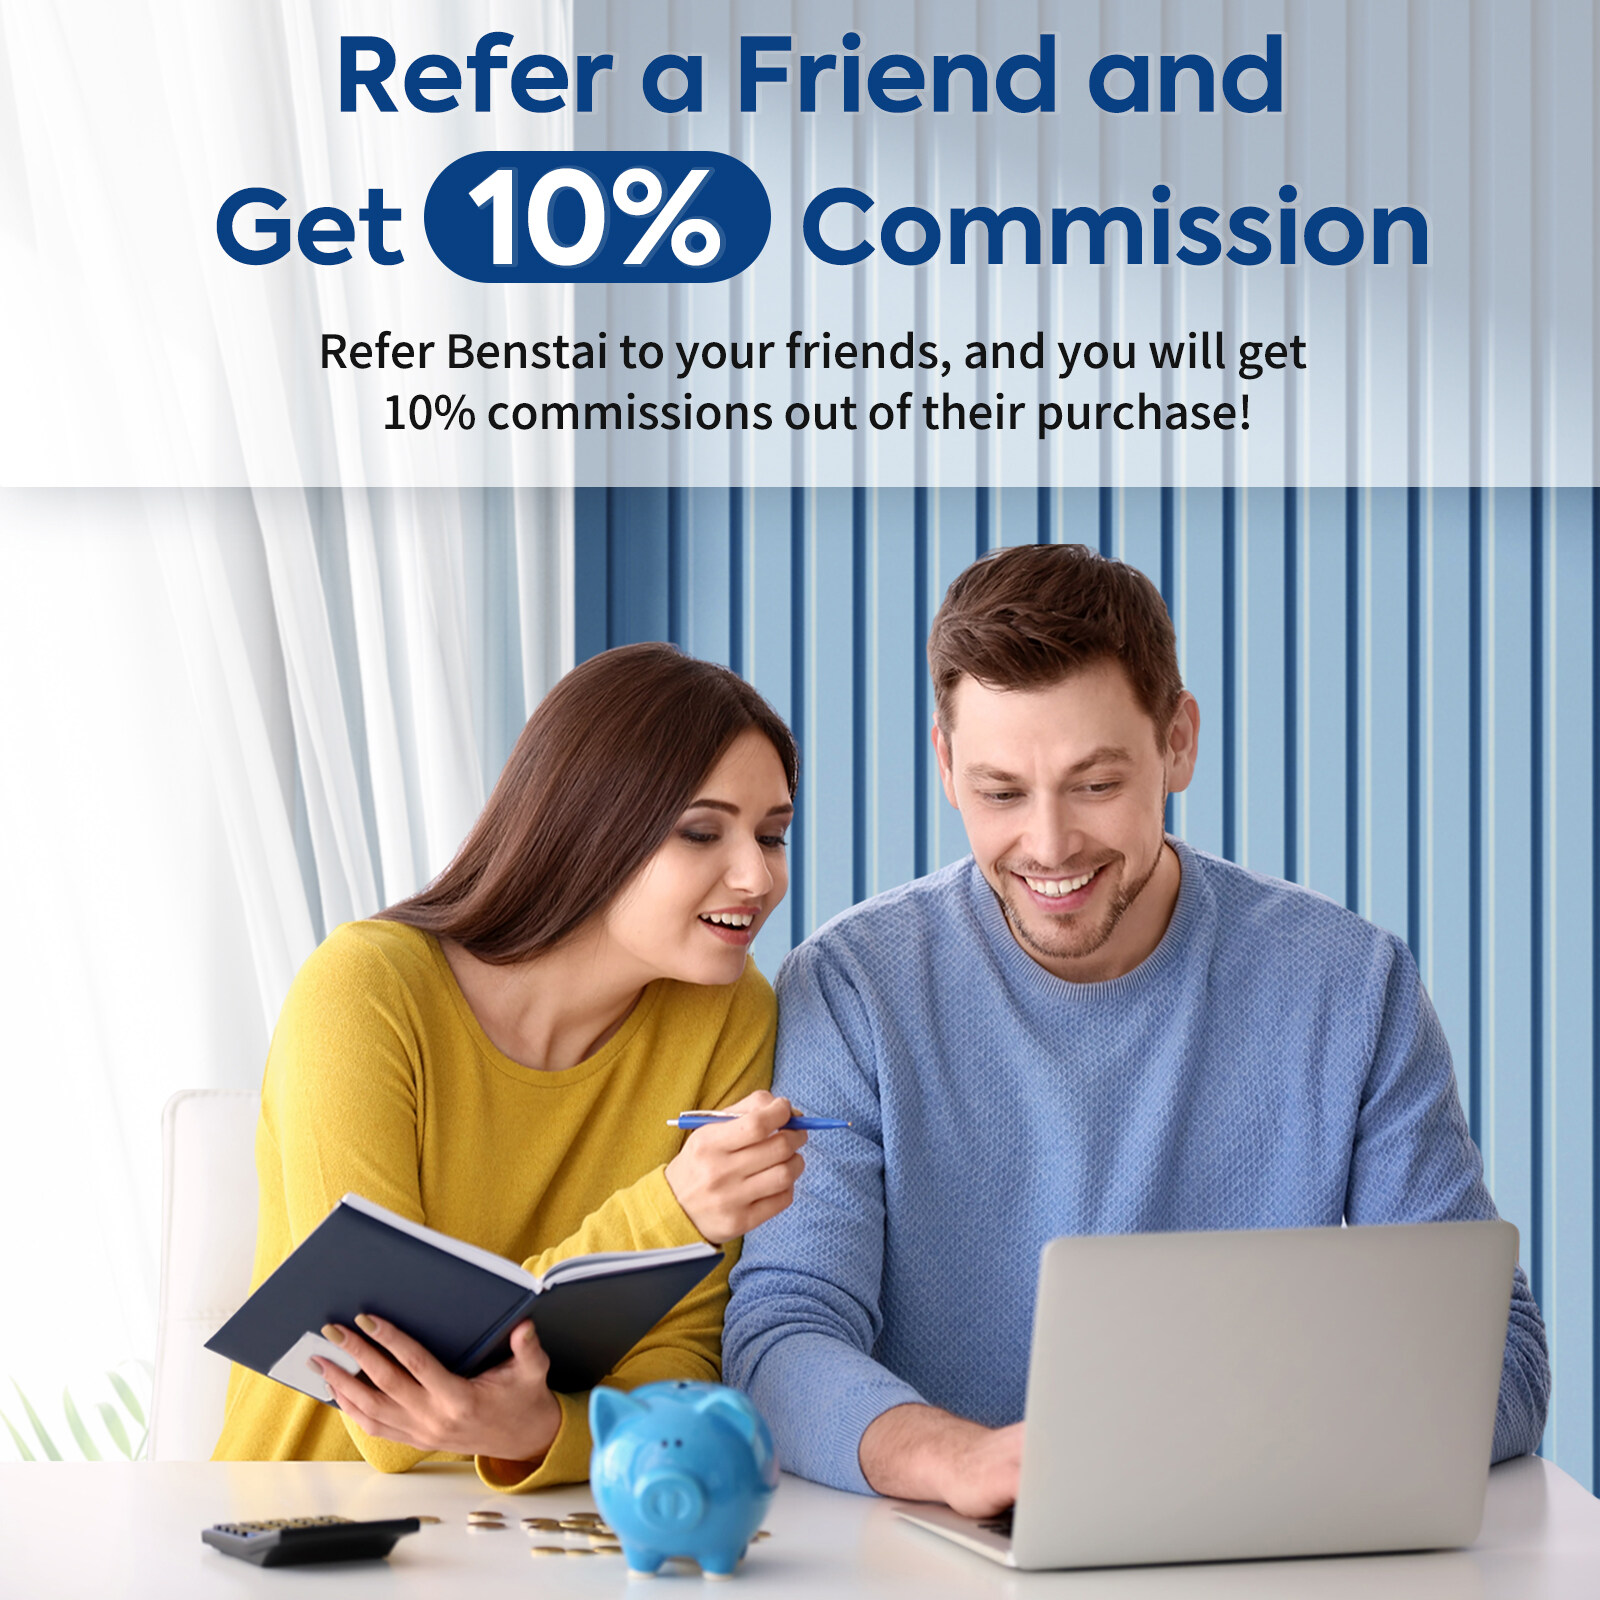 refer a friend and get 10% commisson